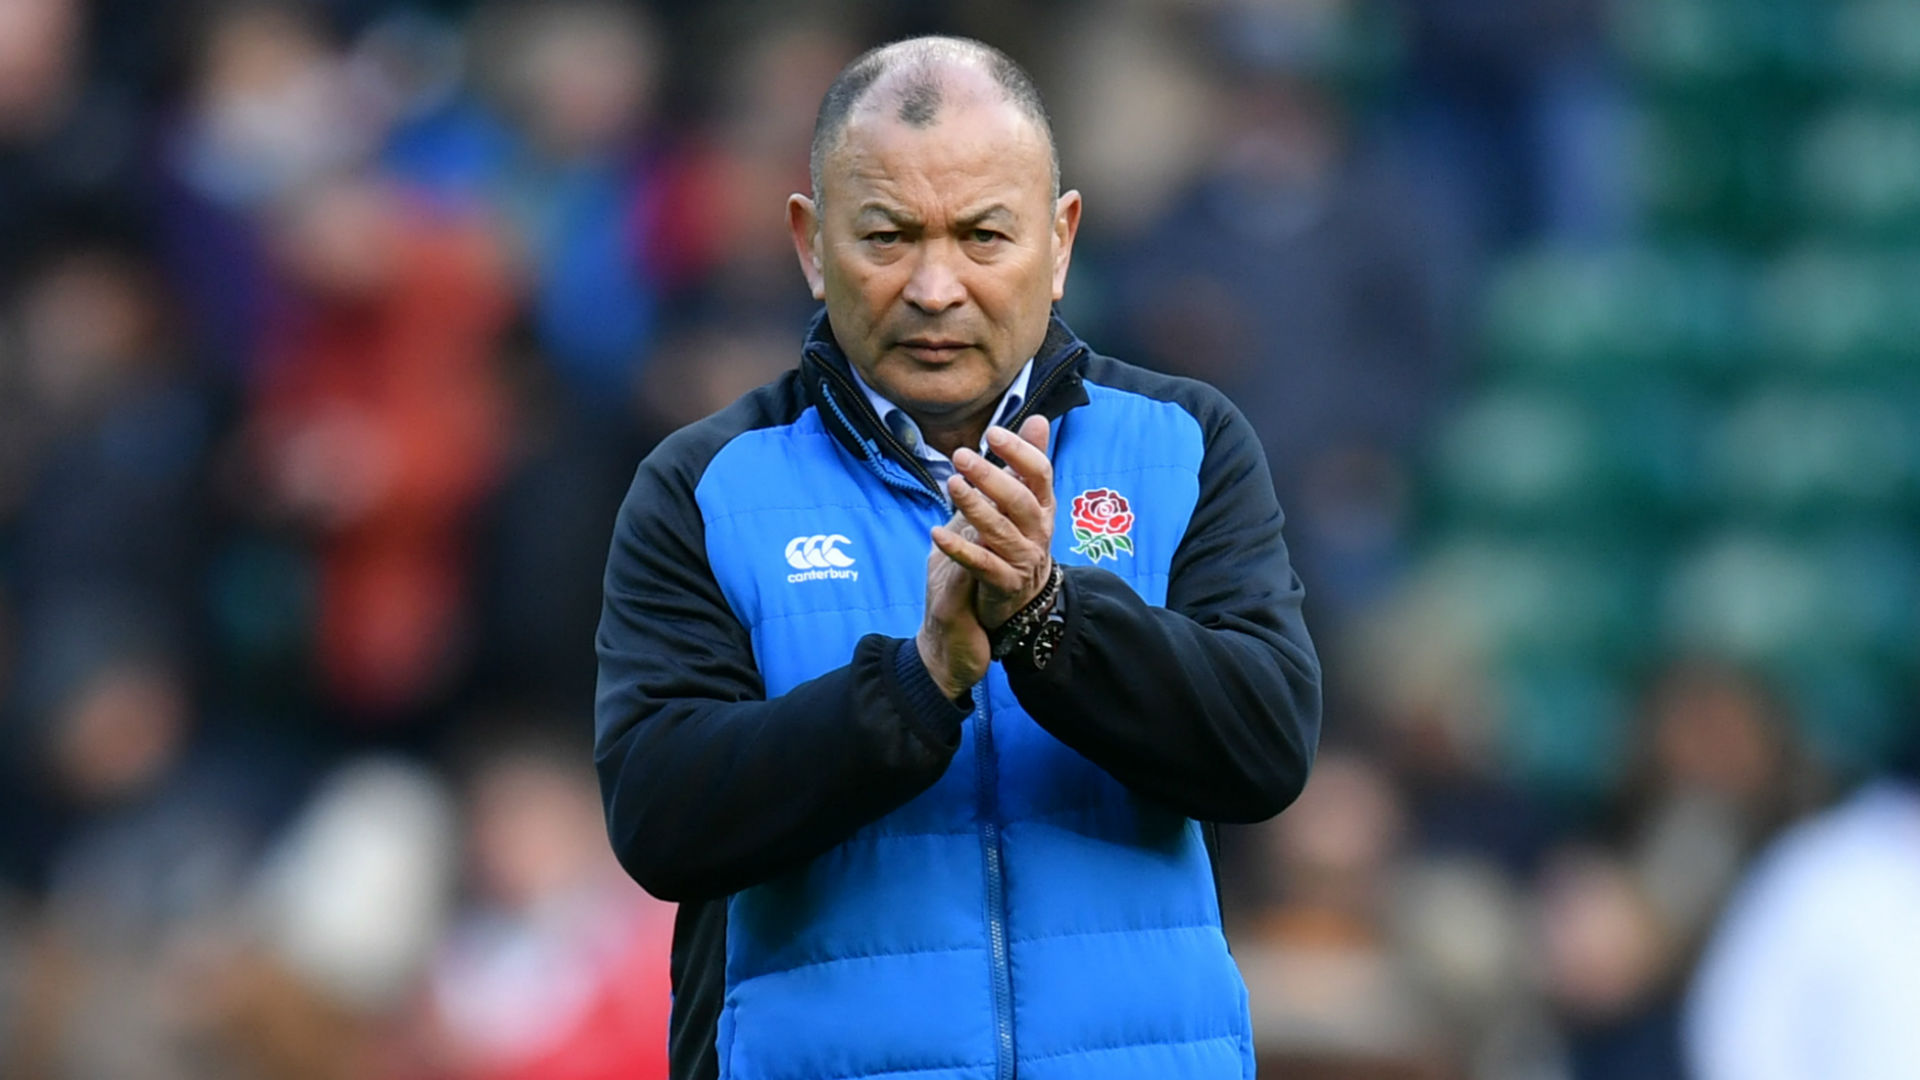 England may be top of the Six Nations table after two bonus-point wins, but Eddie Jones is wary of a Wales team that has won 11 straight.